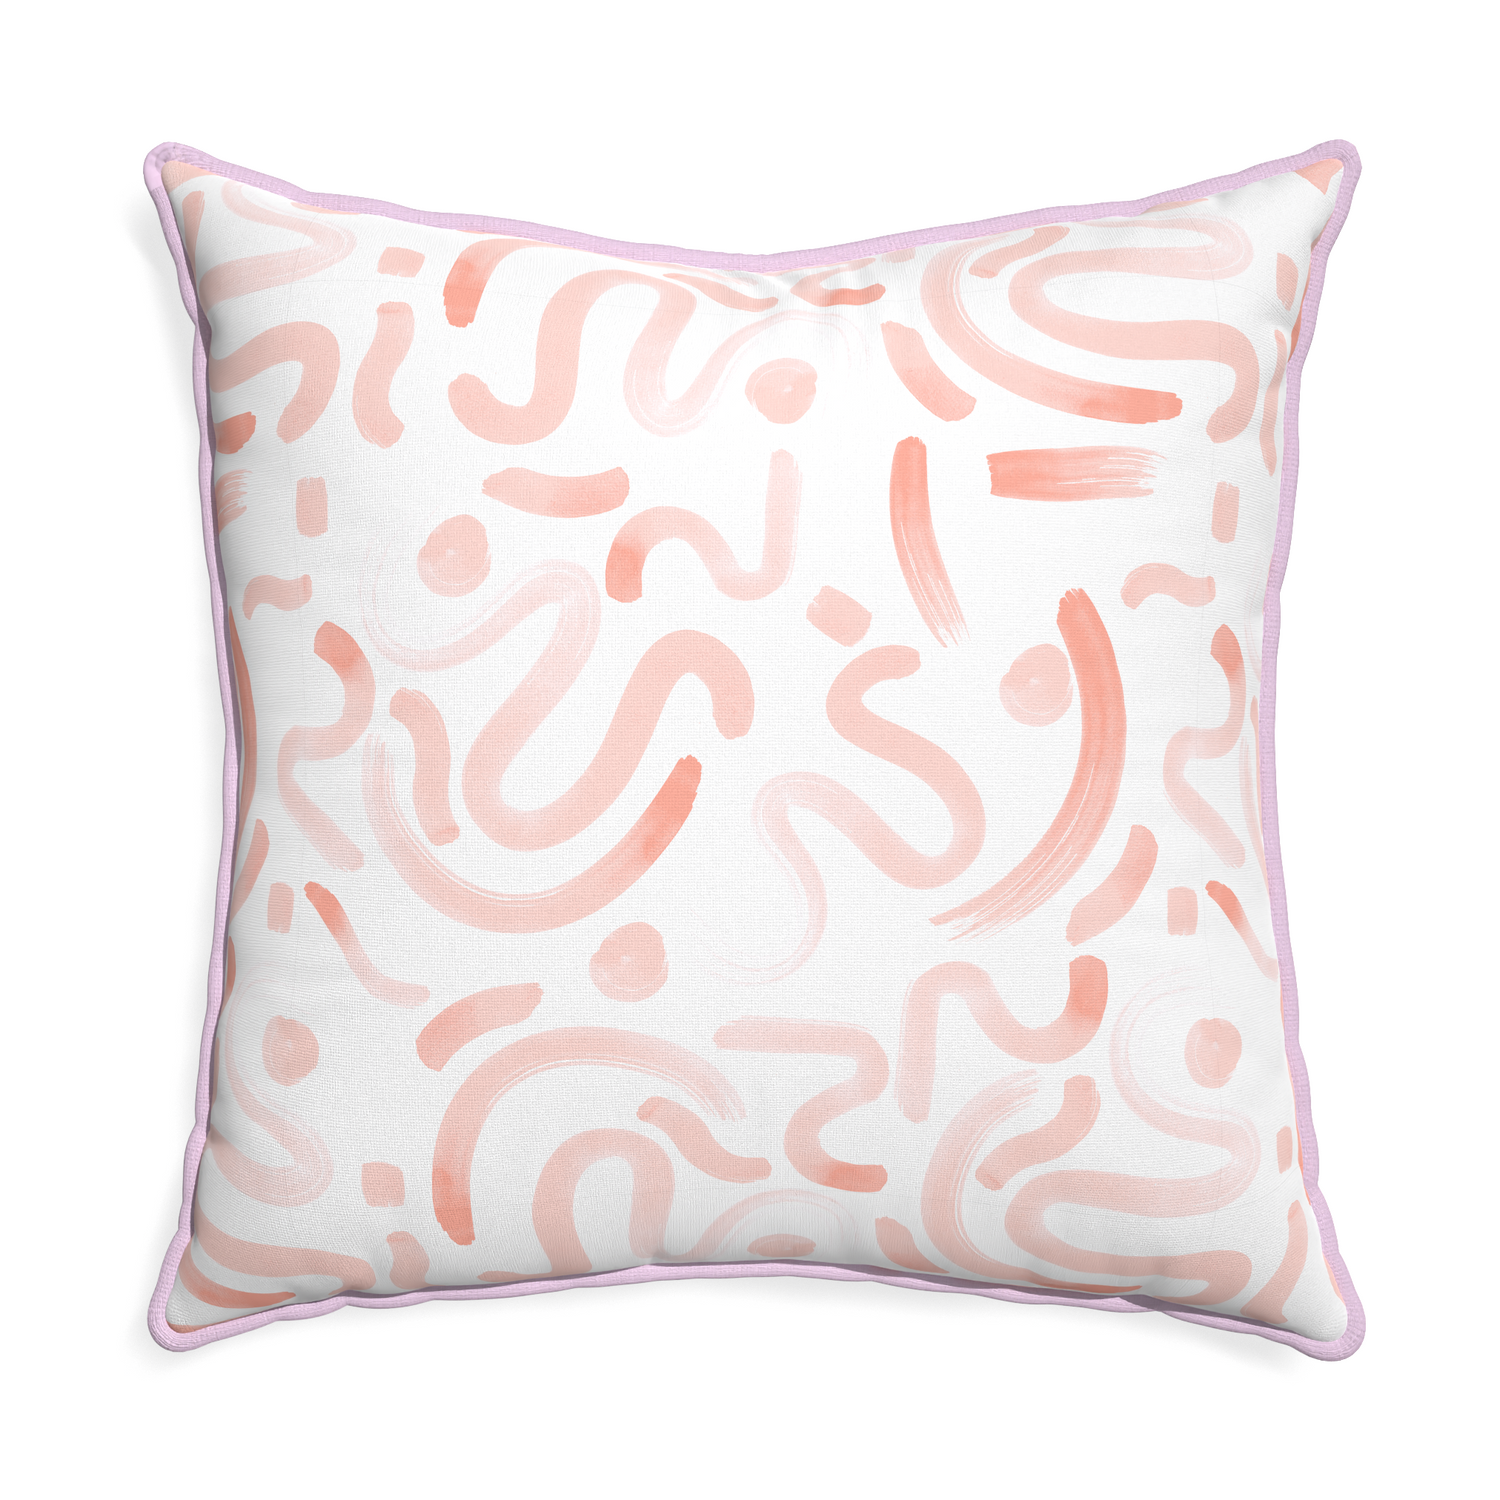 Euro-sham hockney pink custom pink graphicpillow with l piping on white background